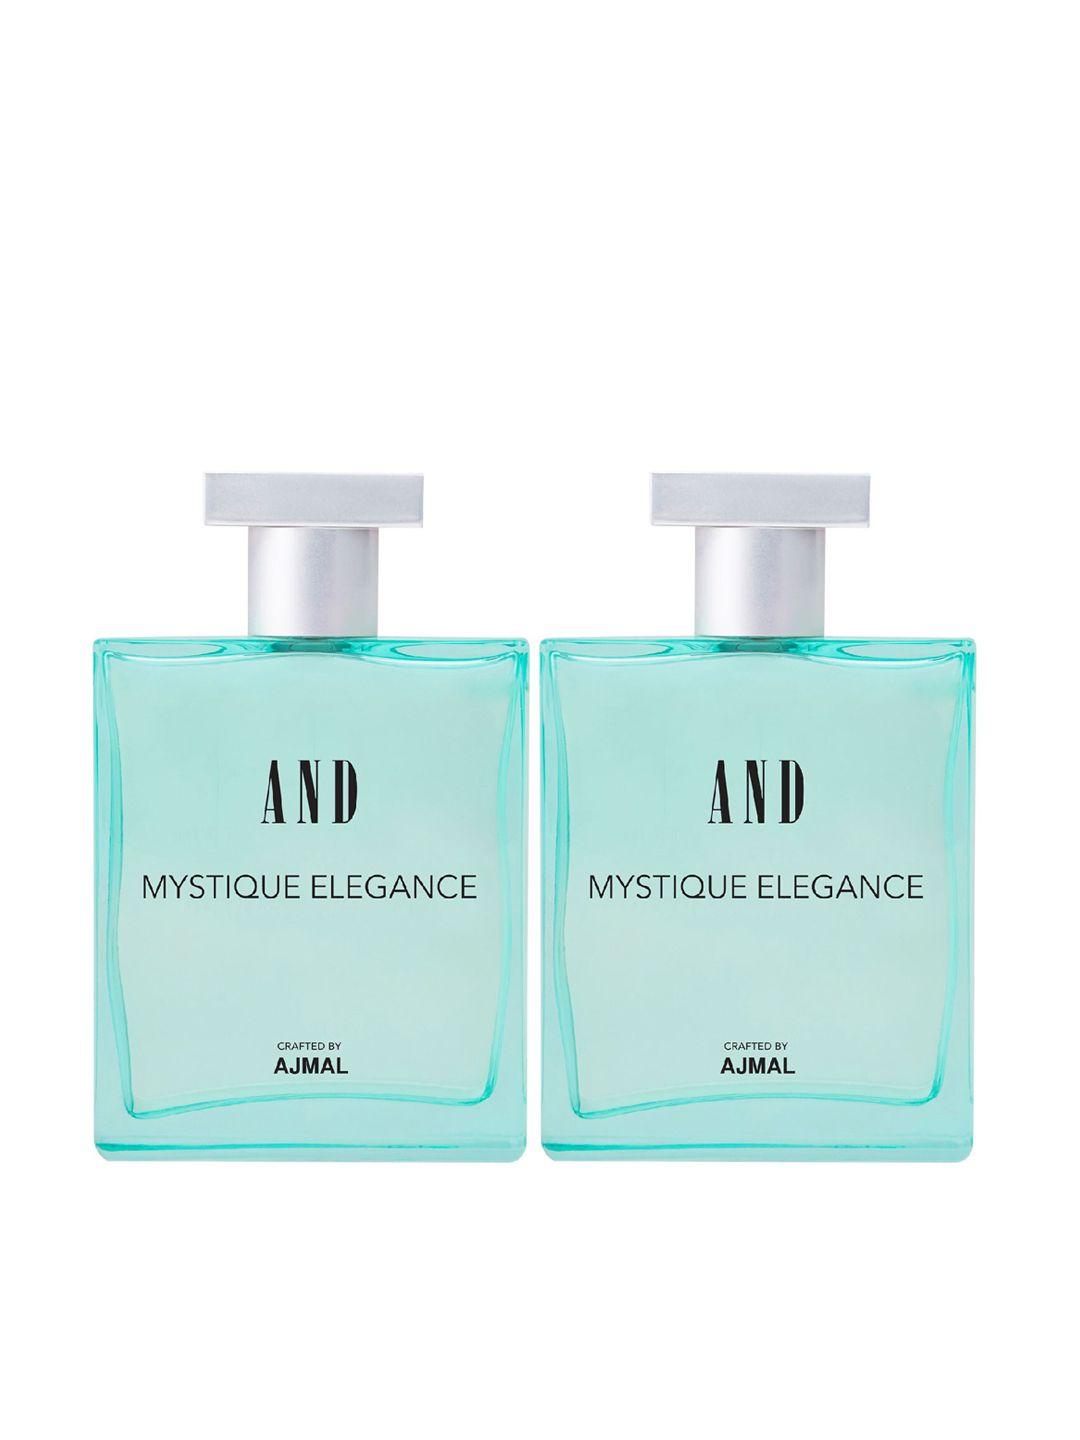 and set of 2 mystique elegance edp - crafted by ajmal